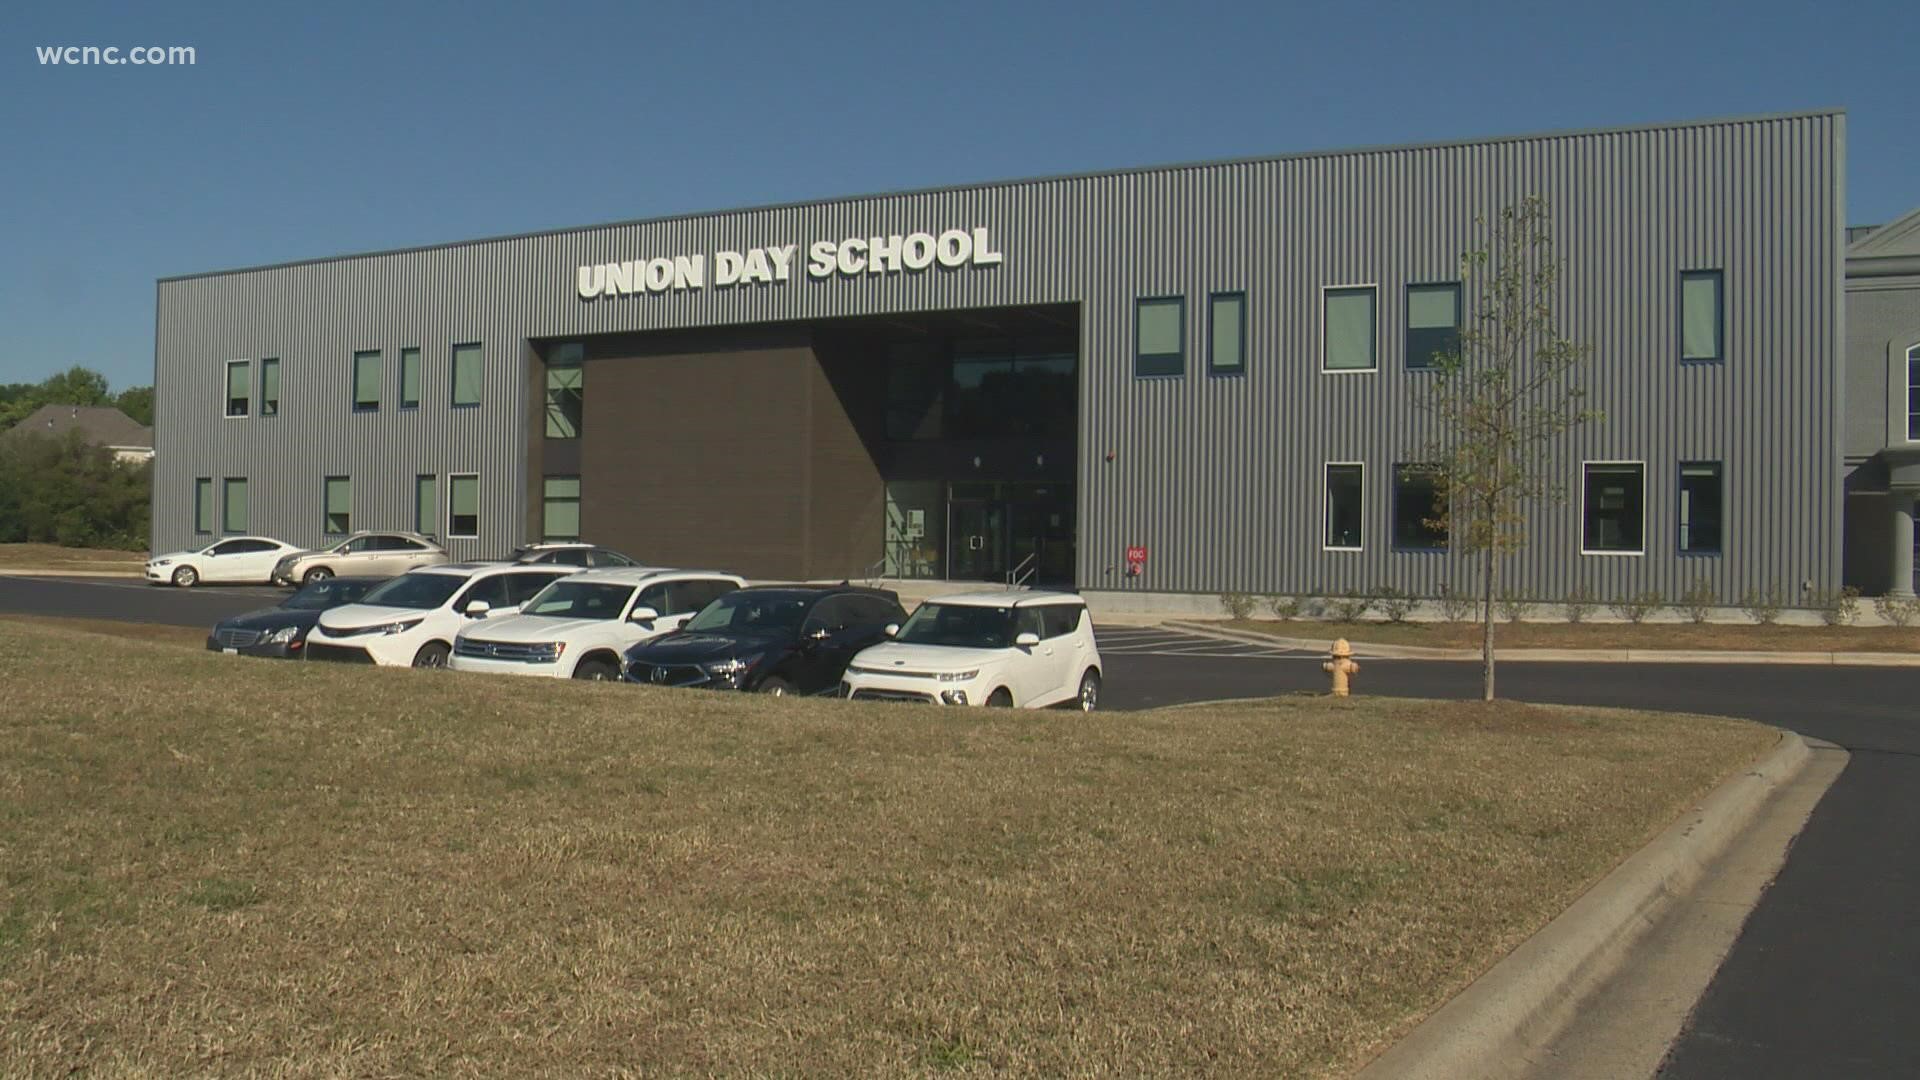 Board members from Union Day School sent a letter to parents addressing concerns following a week-long shutdown due to a staffing shortage and the firing.